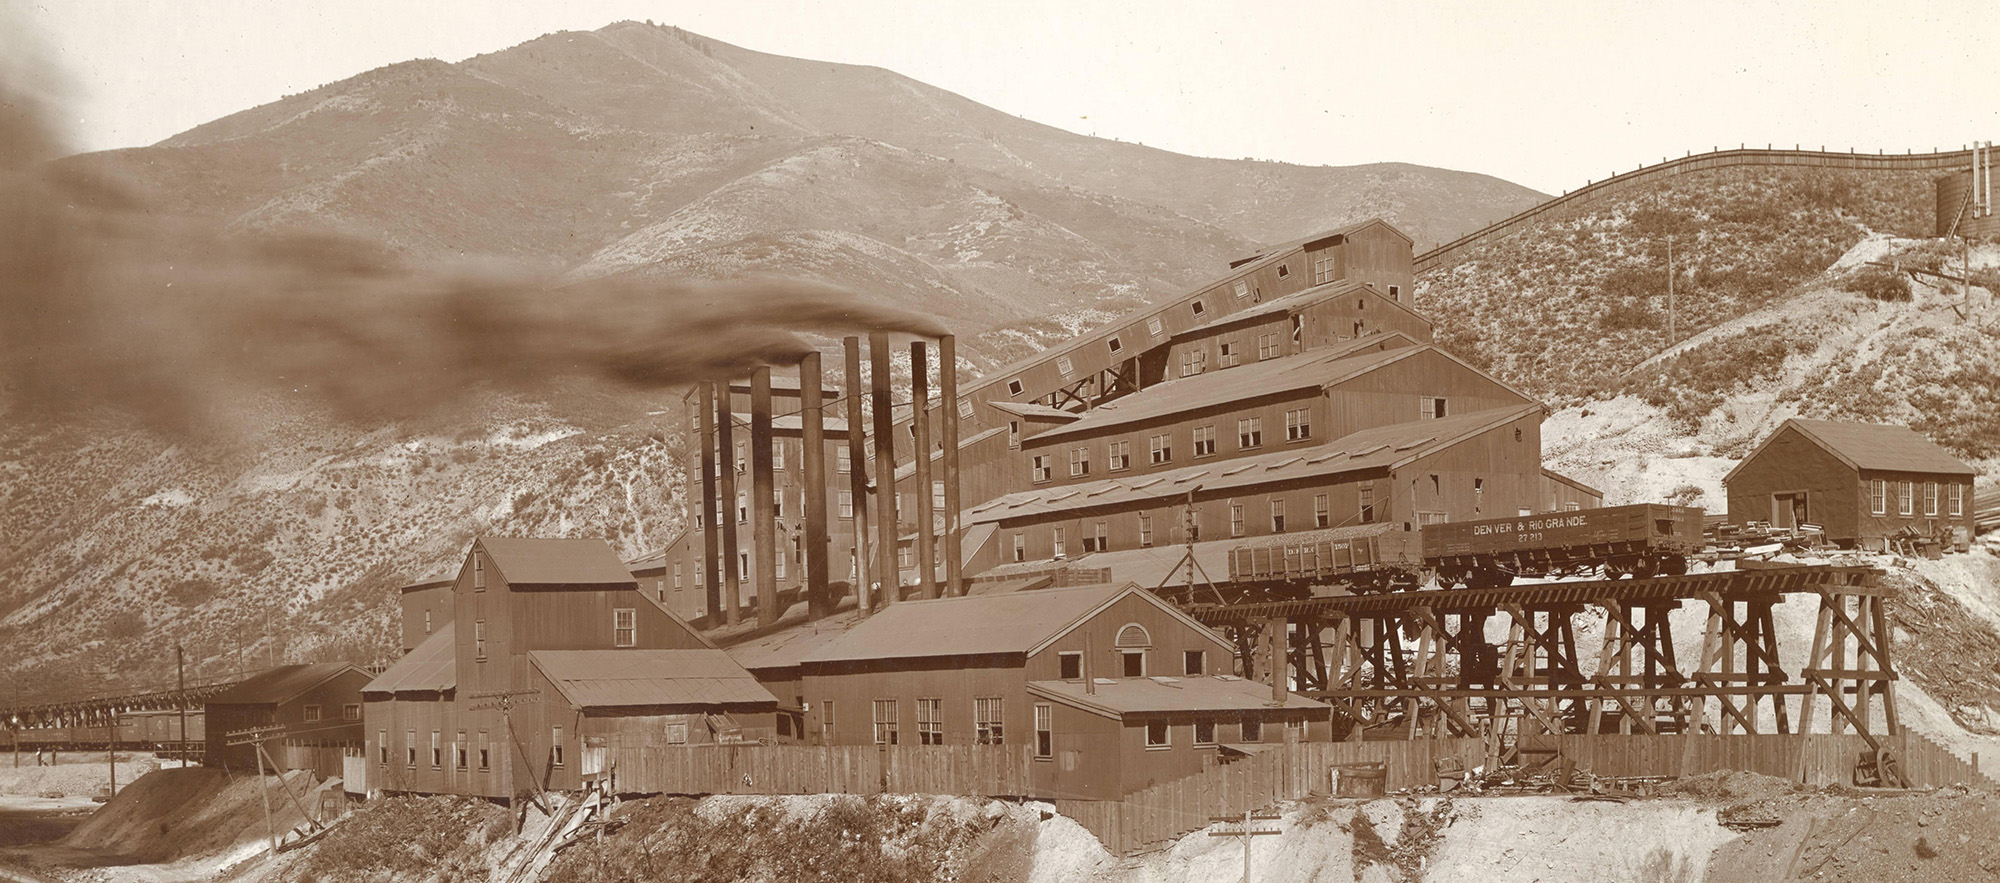 Black and white landscape photo of mining complex with smoking stacks